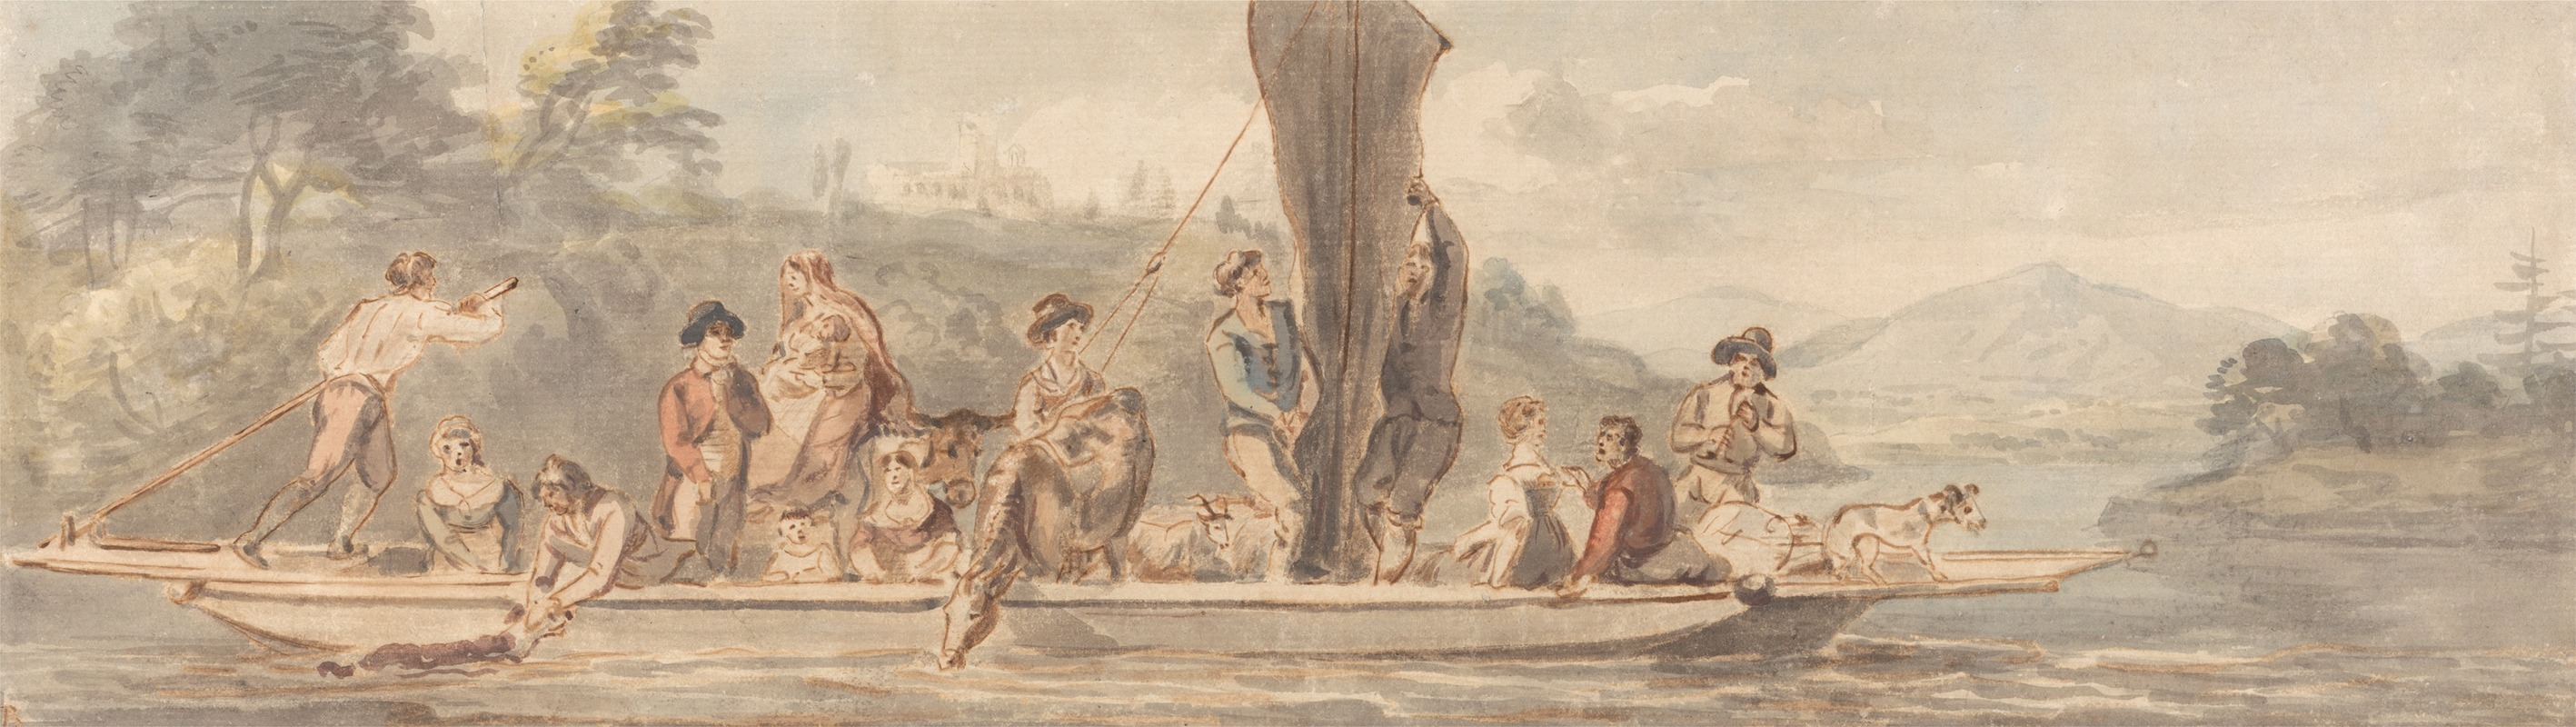 Paul Sandby - River Ferry with Many Passengers and Animals